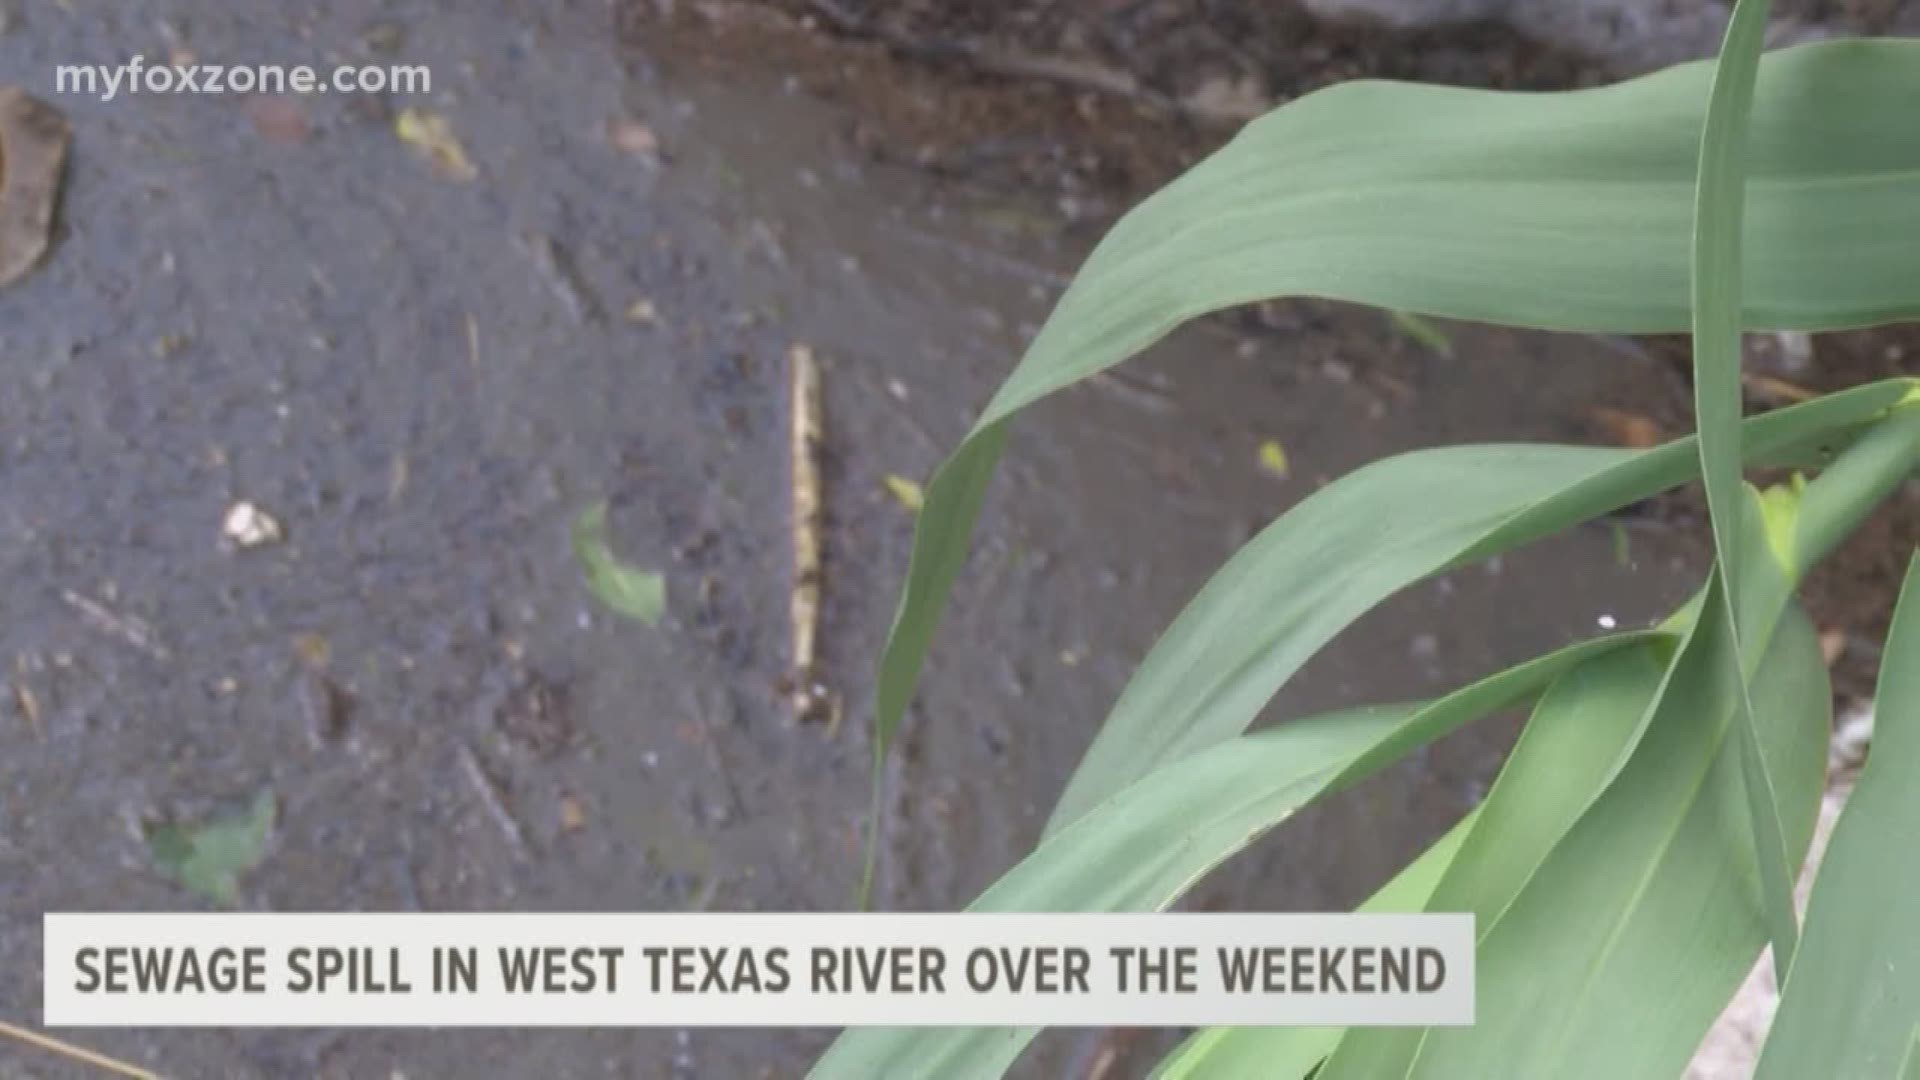 On Sunday, the City of San Angelo announced that there was an issue with the wastewater treatment facility.